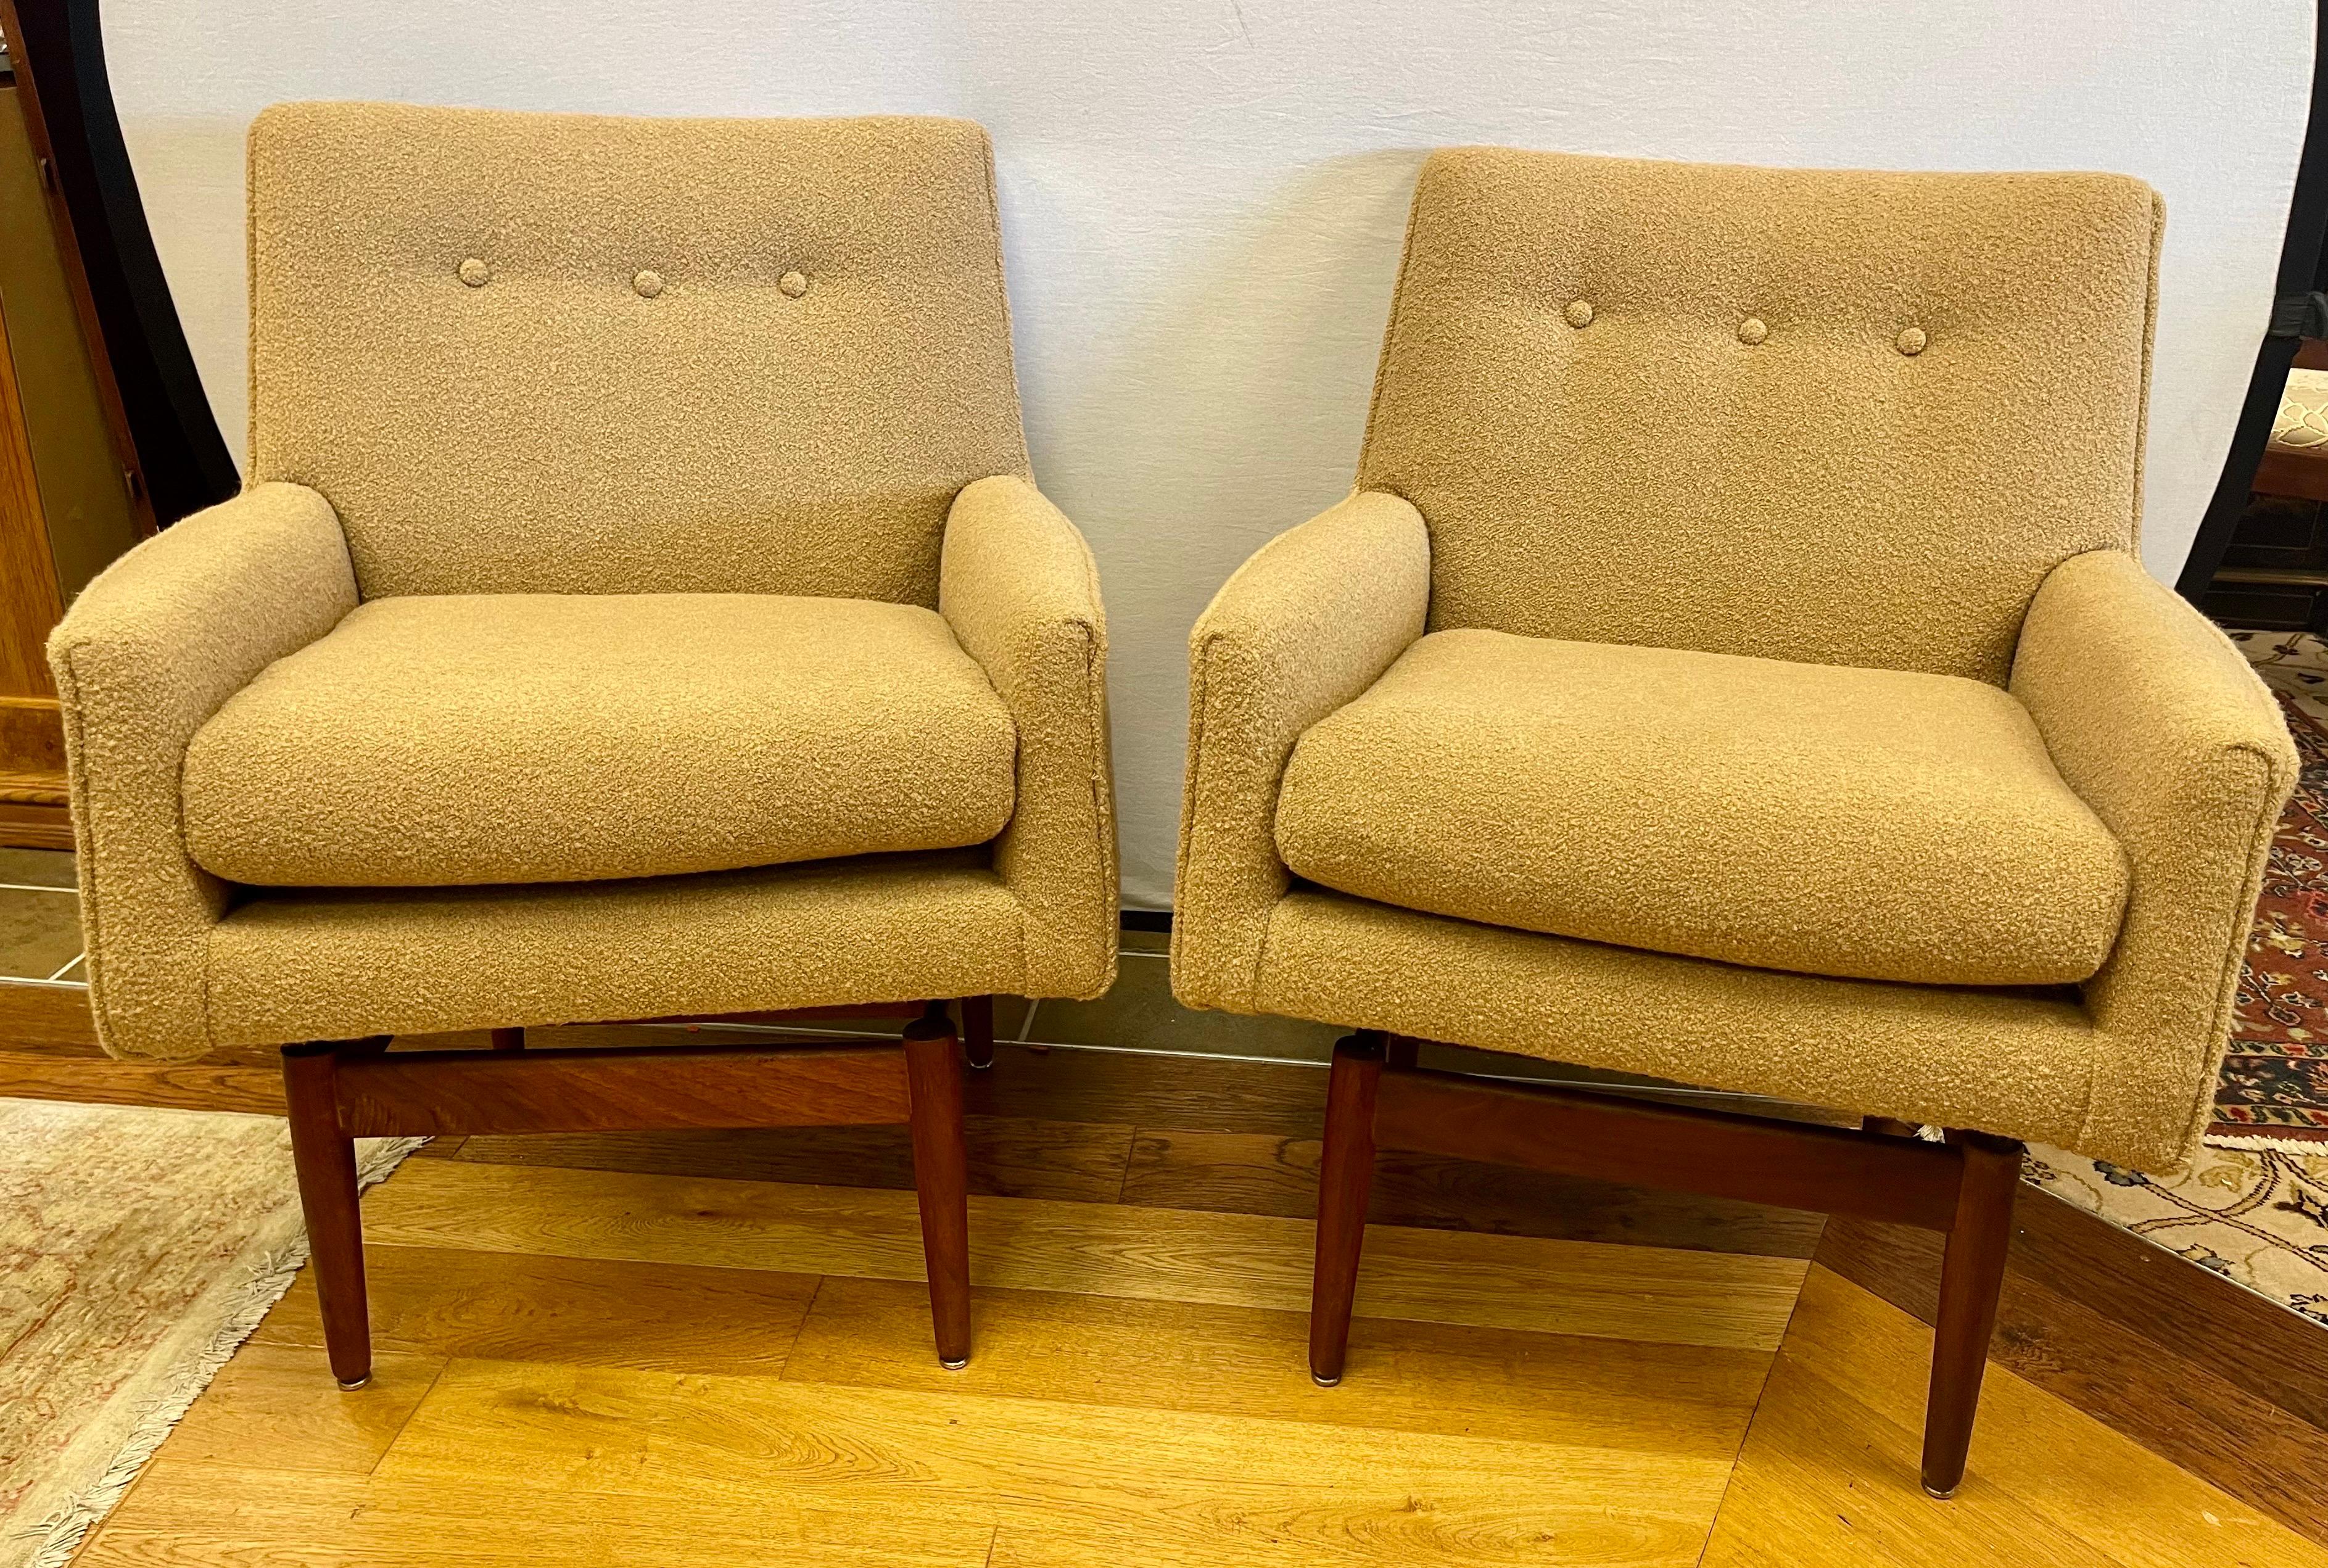 Magnificent matching pair of newly upholstered Jens Risom swivel lounge chairs.
The fabric is new by Ralph Lauren and is a light brown boucle fabric. The chairs appear to float on a walnut base that swivels. Gorgeous lines and better scale.
Why